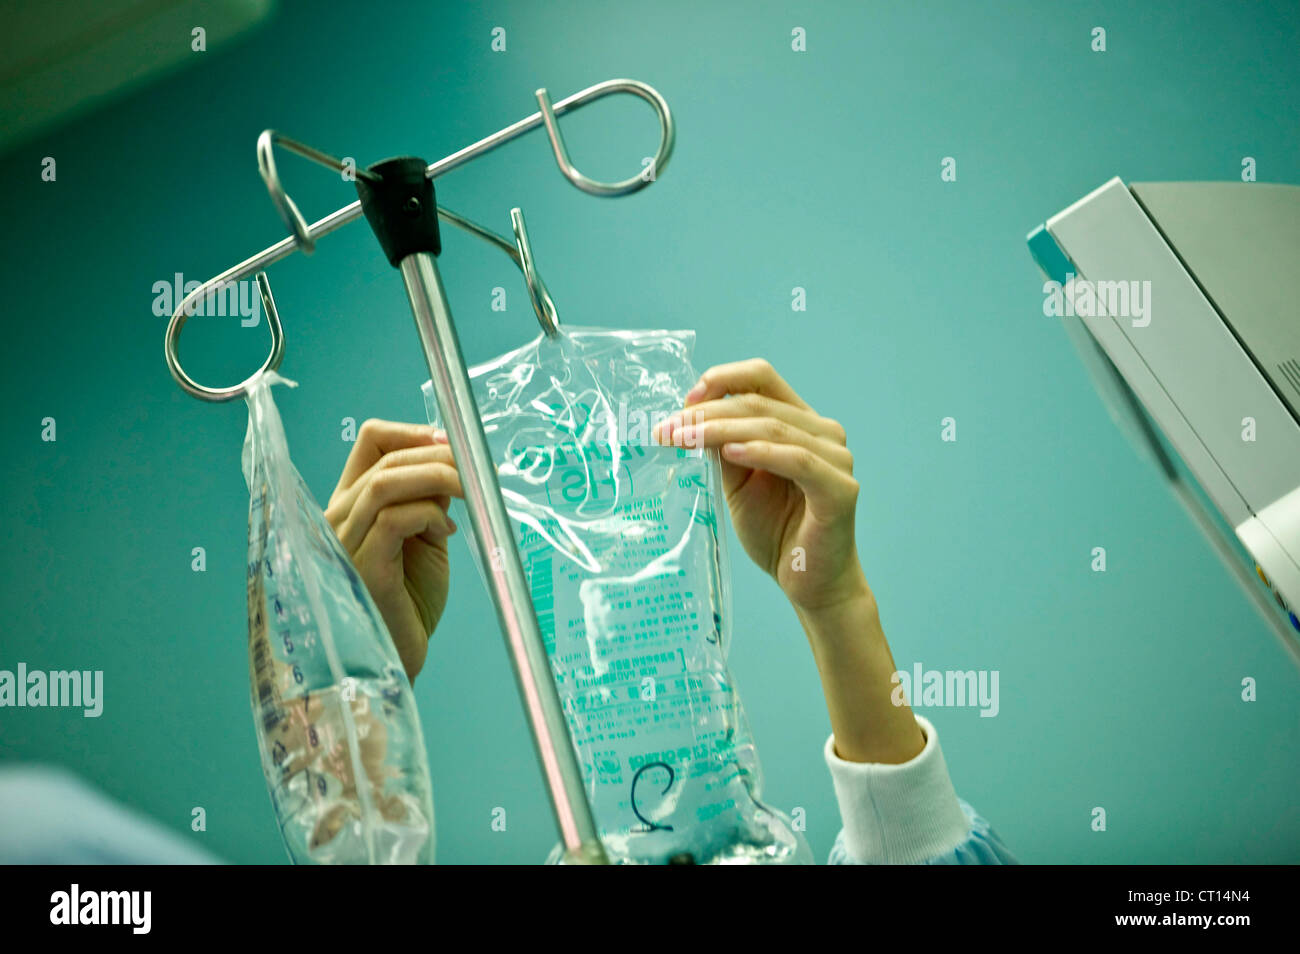 A bag with sodium lactate, also known as Hartmann's solution, is prepared for intravenous infusion. Stock Photo